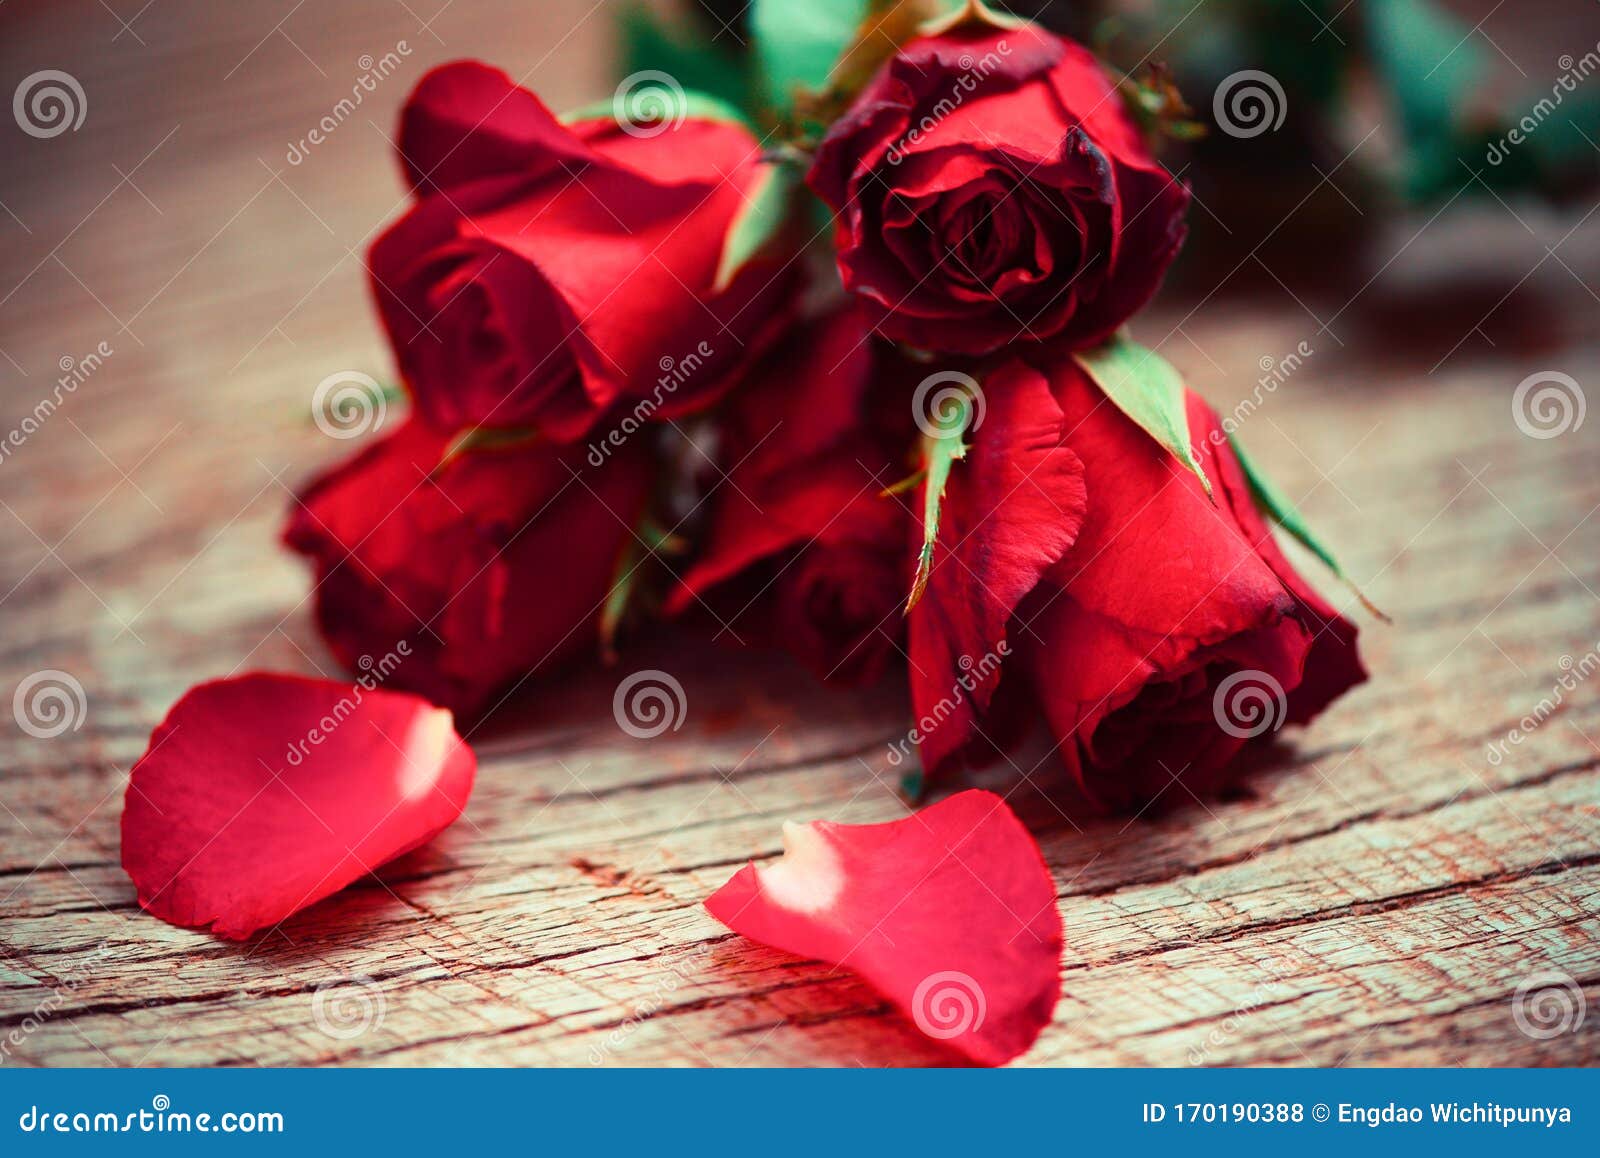 Flowers Rose Petals Romantic Love Valentine Day Concept - Red ...